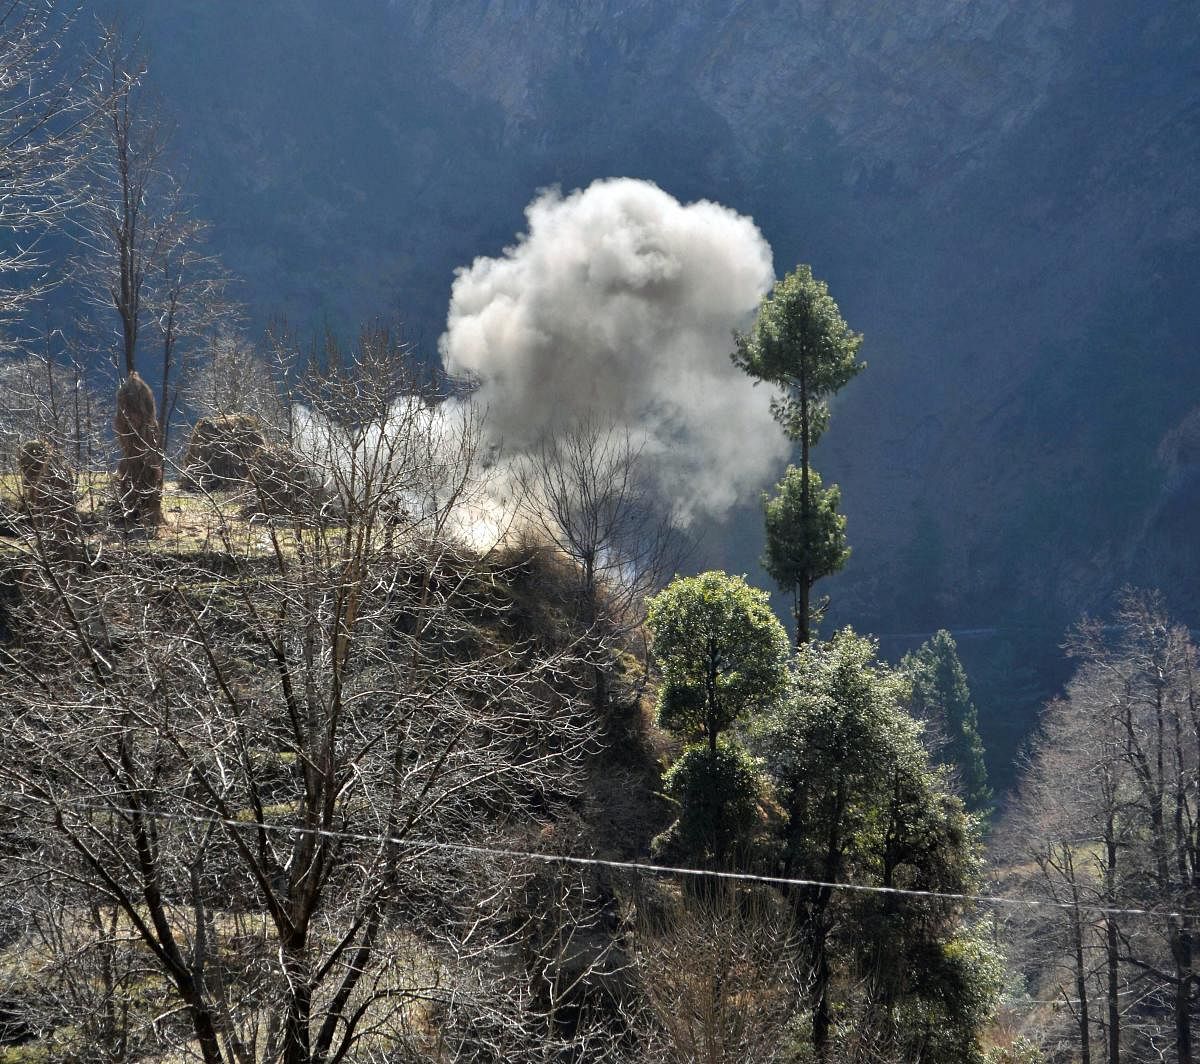 Firing by Pakistani Army near the Line of Control (LoC). (DH File Photo)